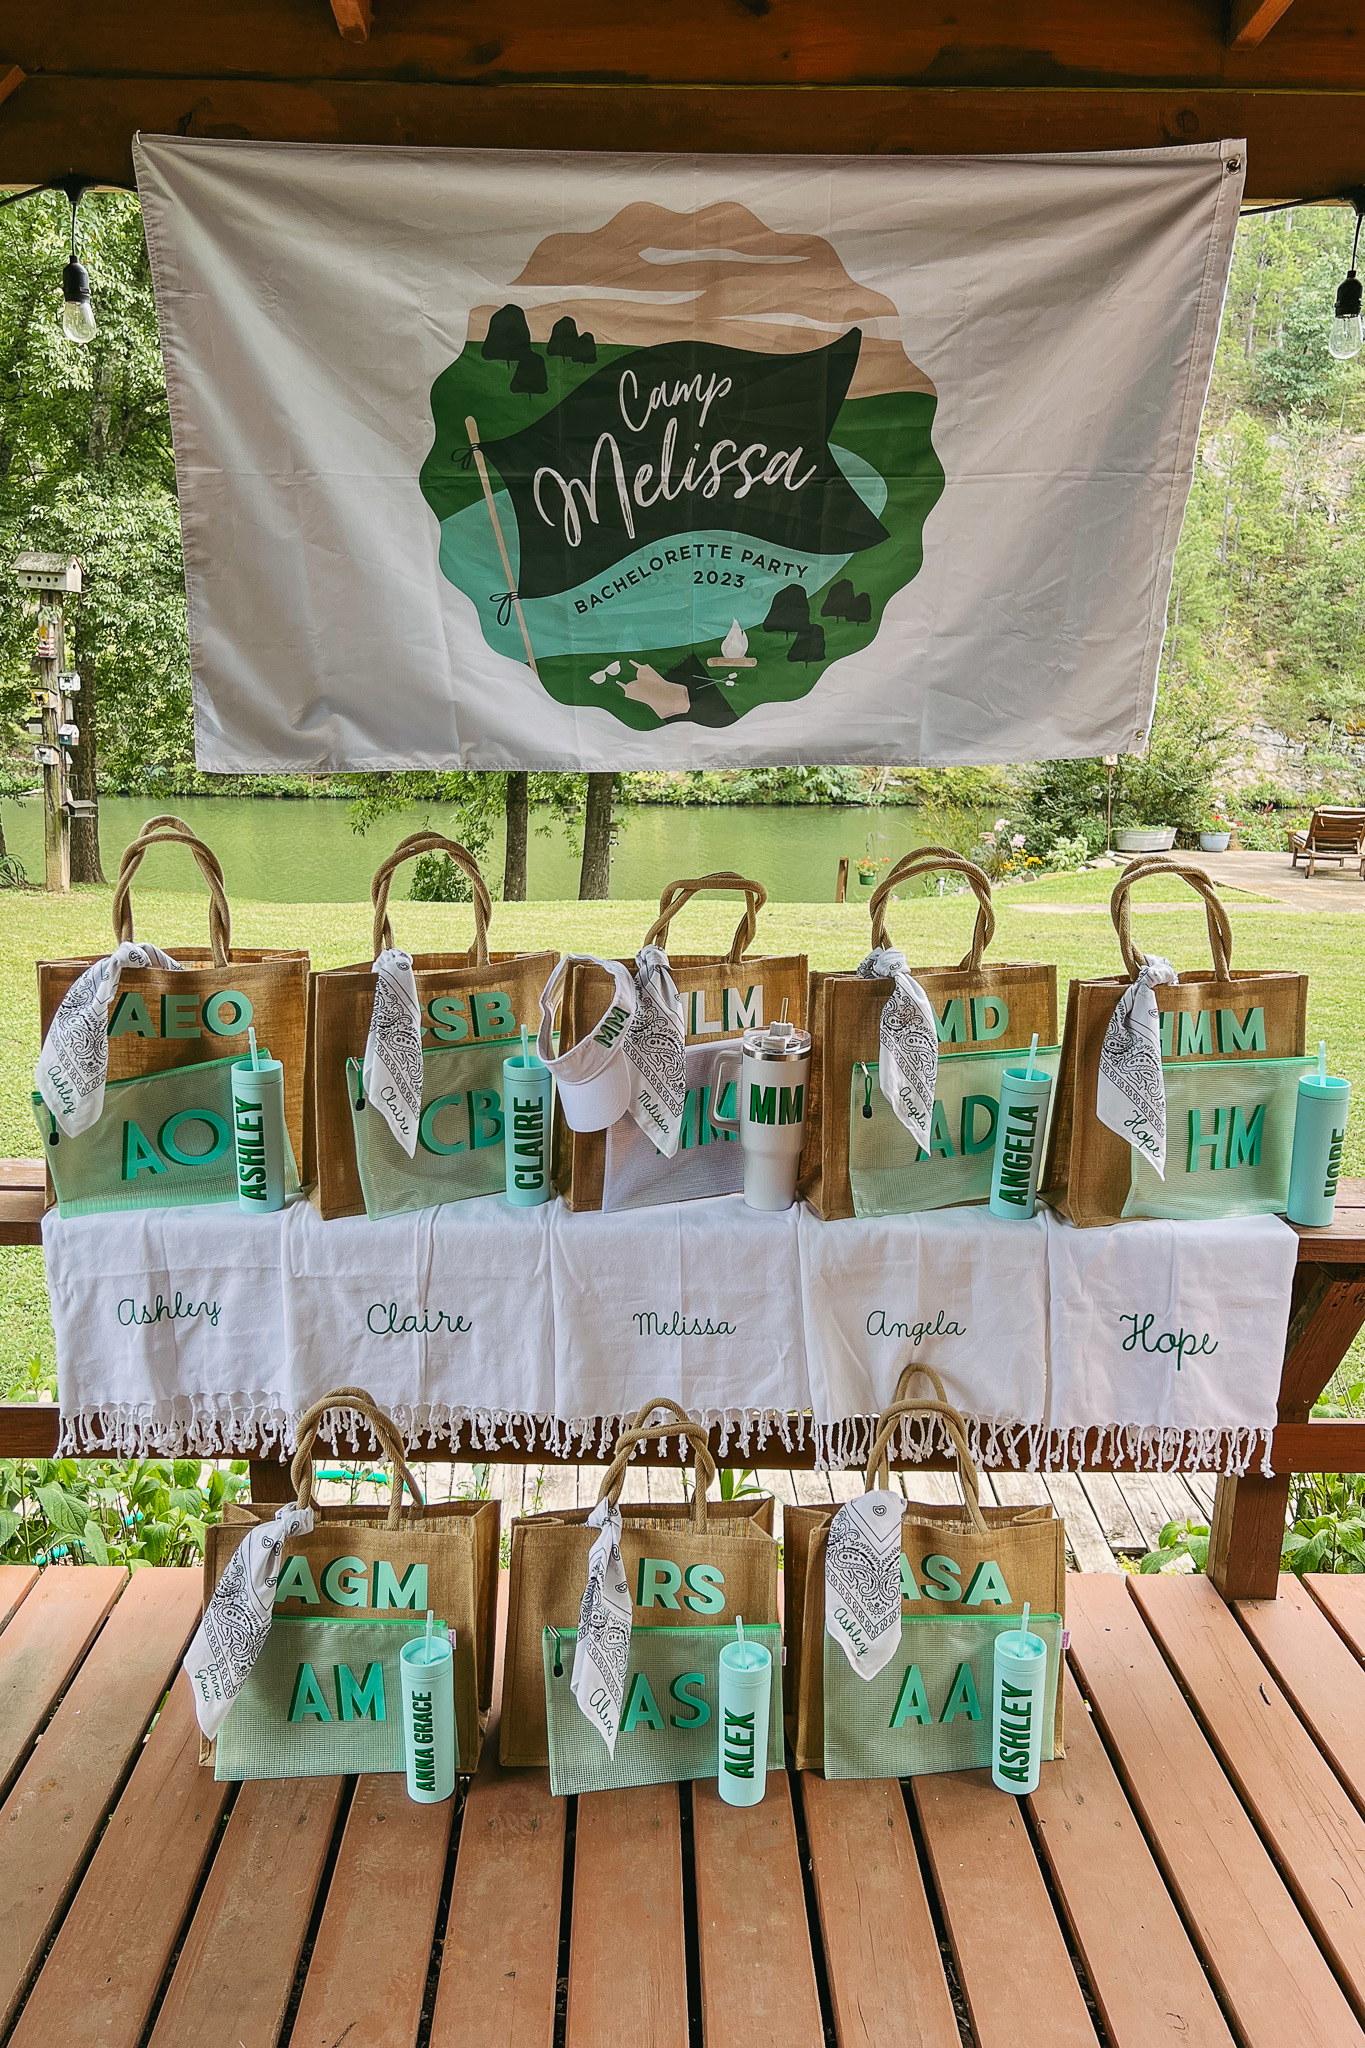 Bachelorette Party Ideas for the Outdoorsy Bride - The Complete